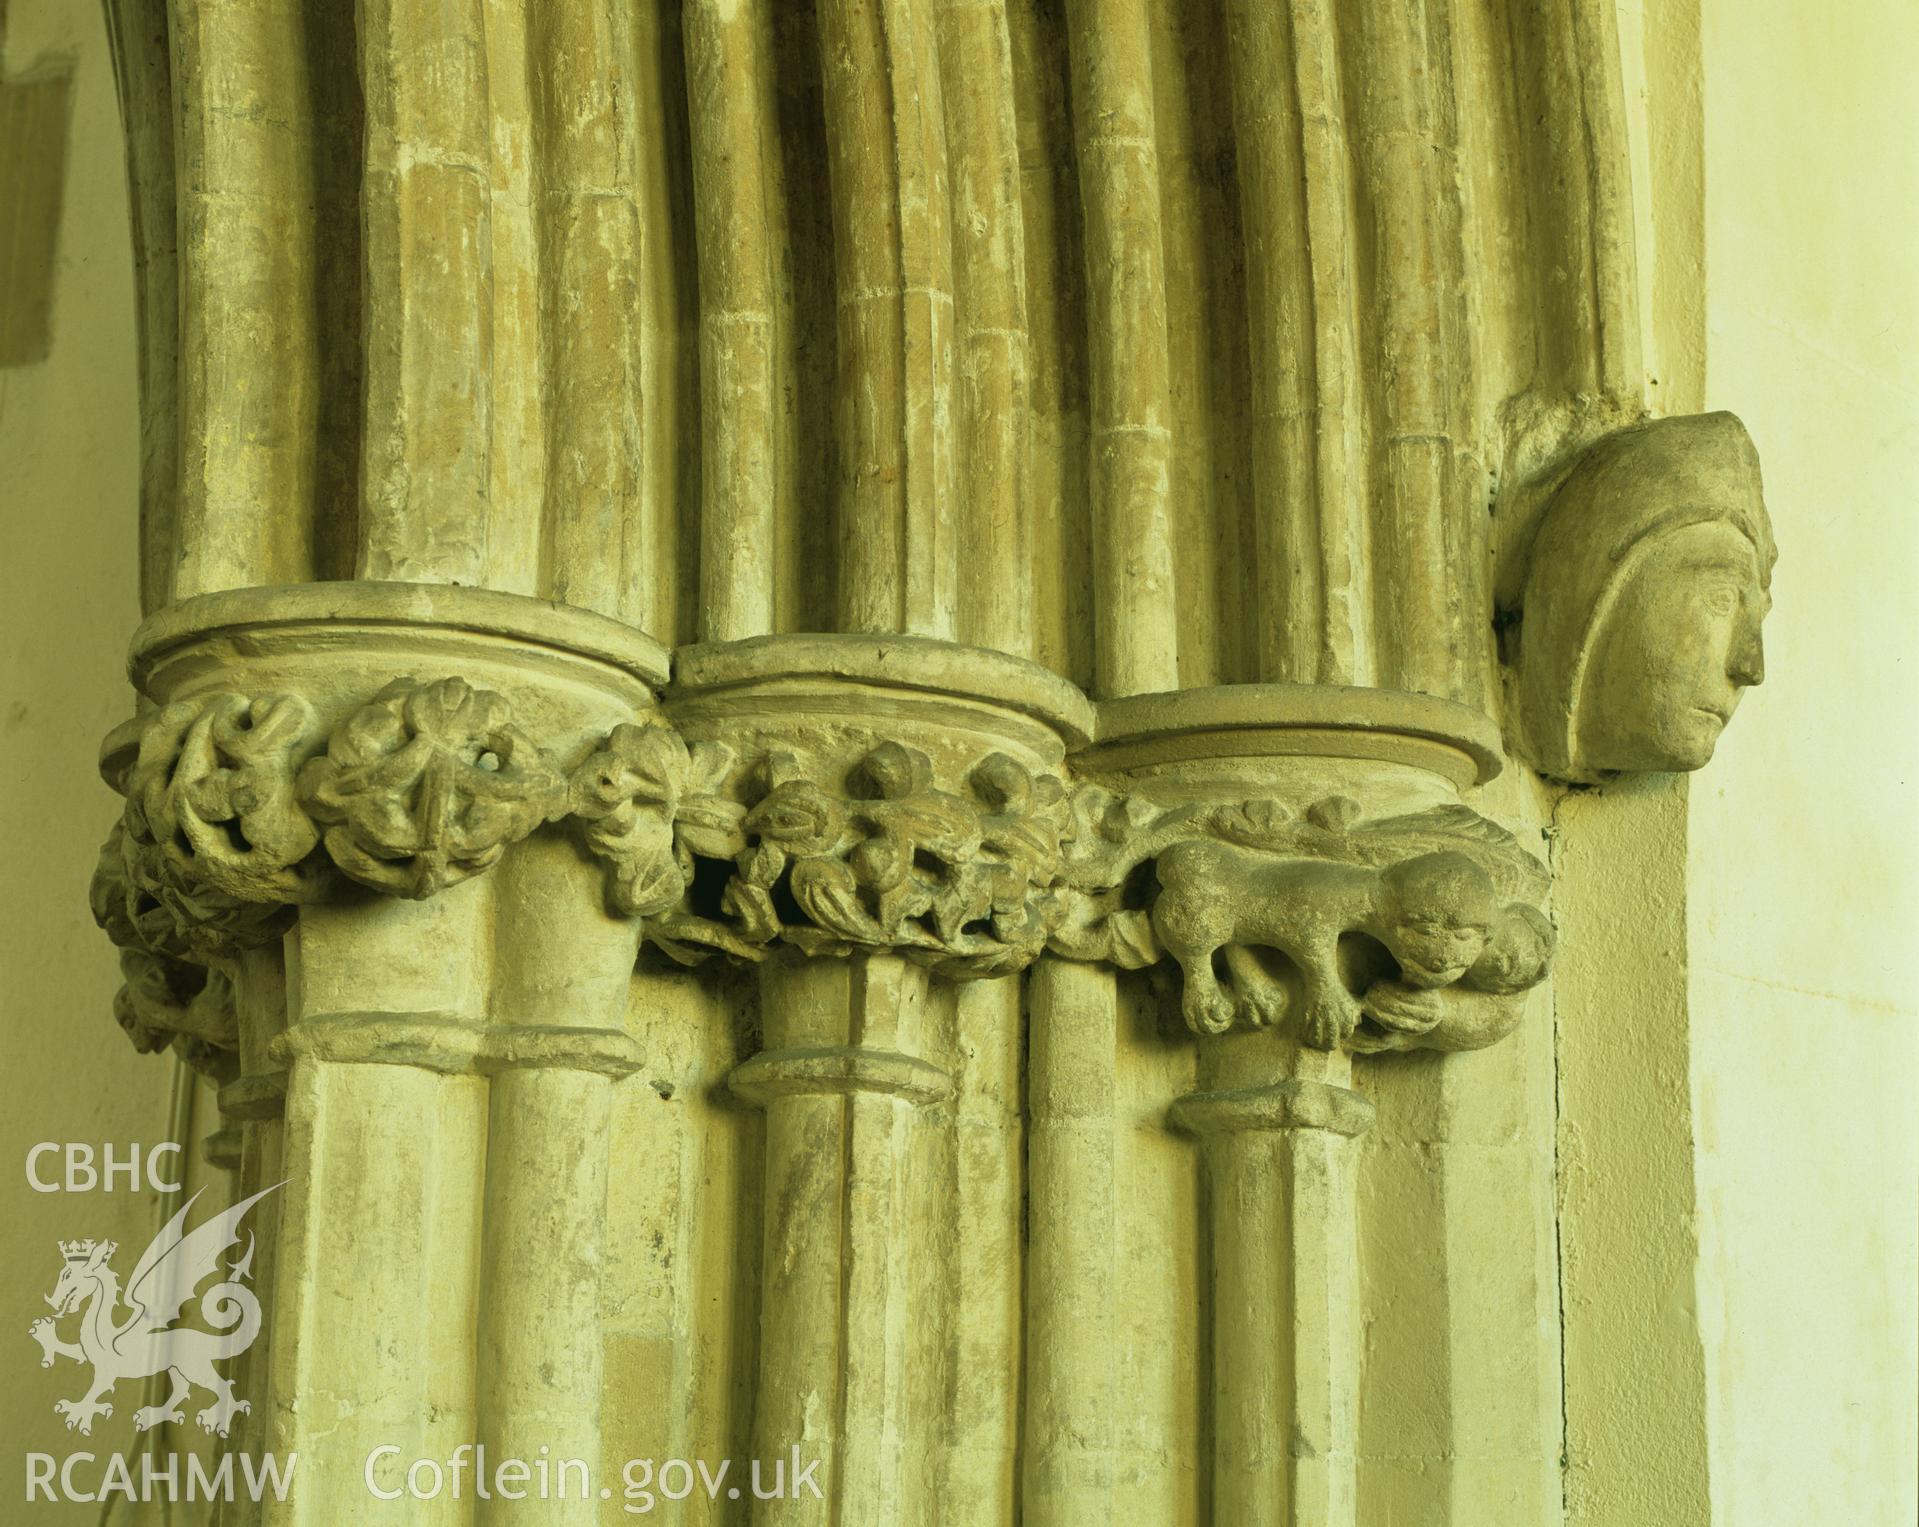 RCAHMW colour transparency showing detail of stone carving at St Marys Church, Haverfordwest, taken by Iain Wright, 2003.